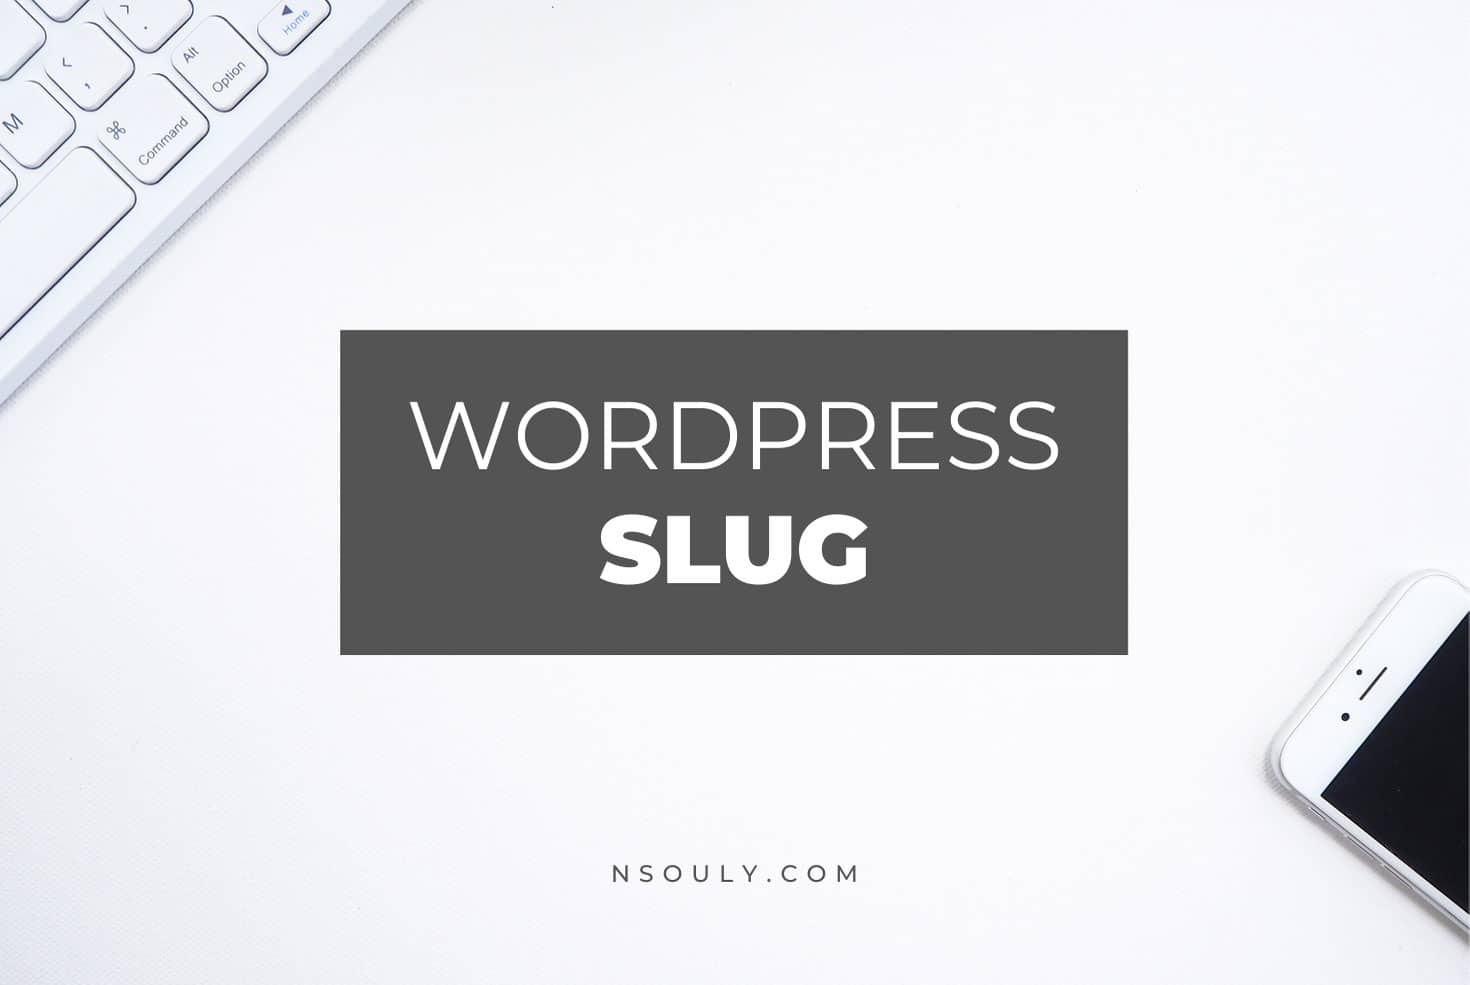 Slug: What is It and How to Optimize It?